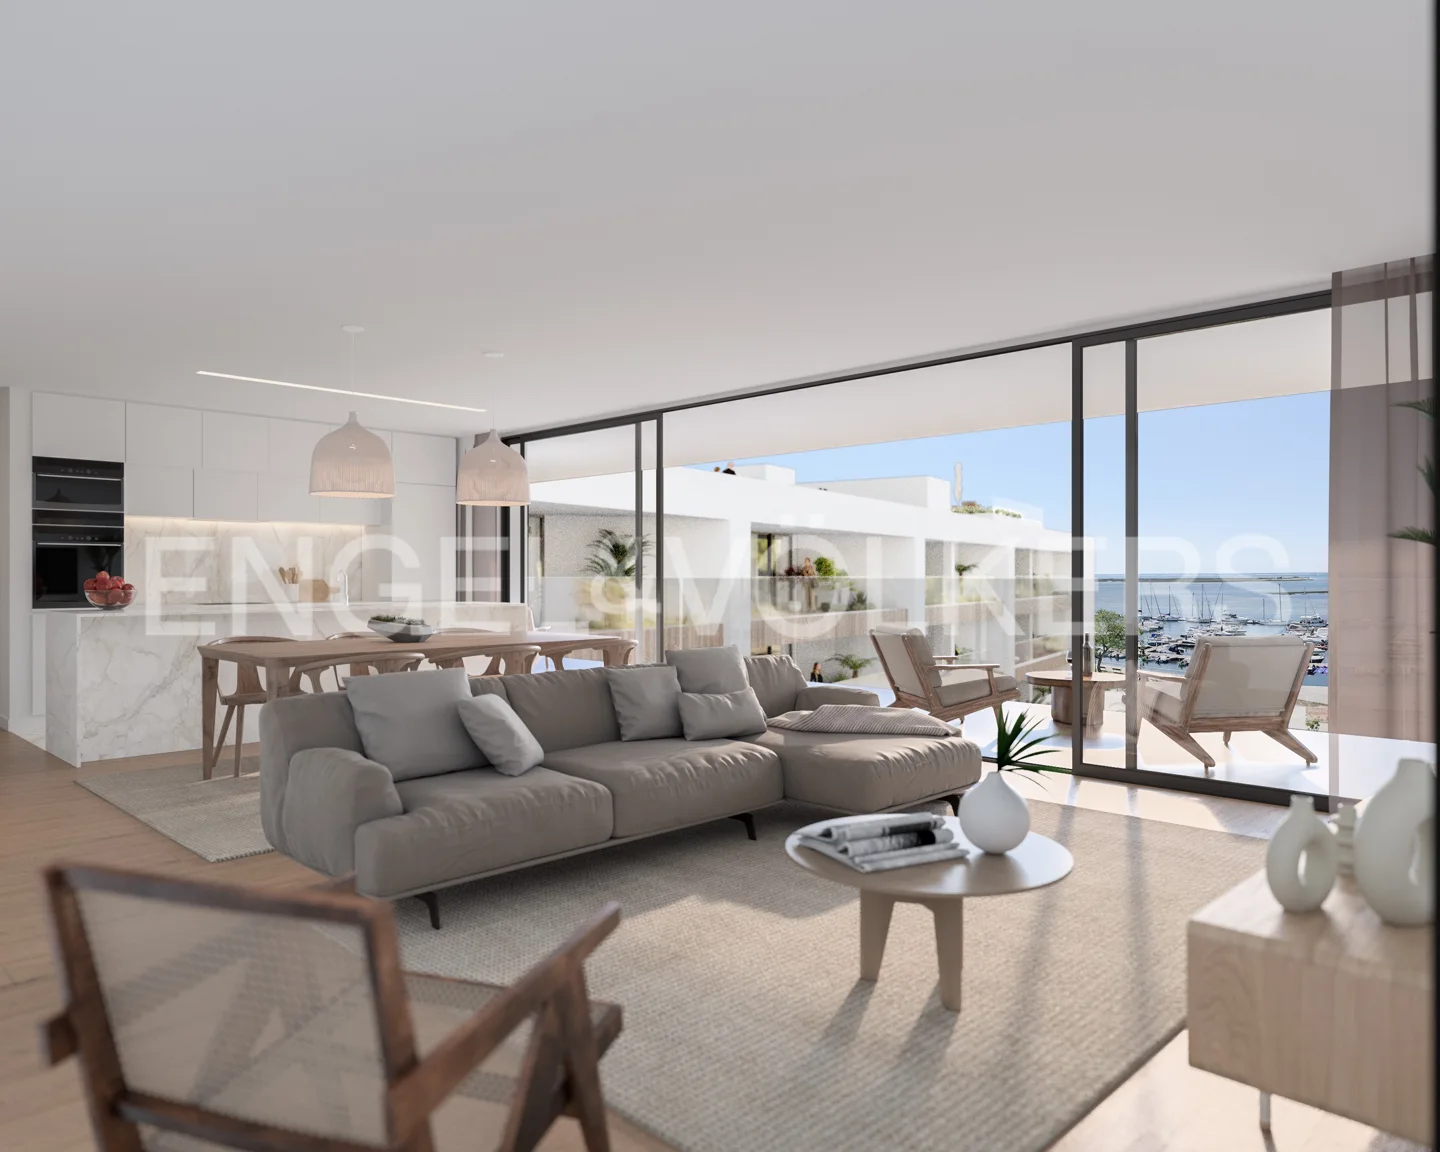 Luxury apartments overlooking the Ria Formosa